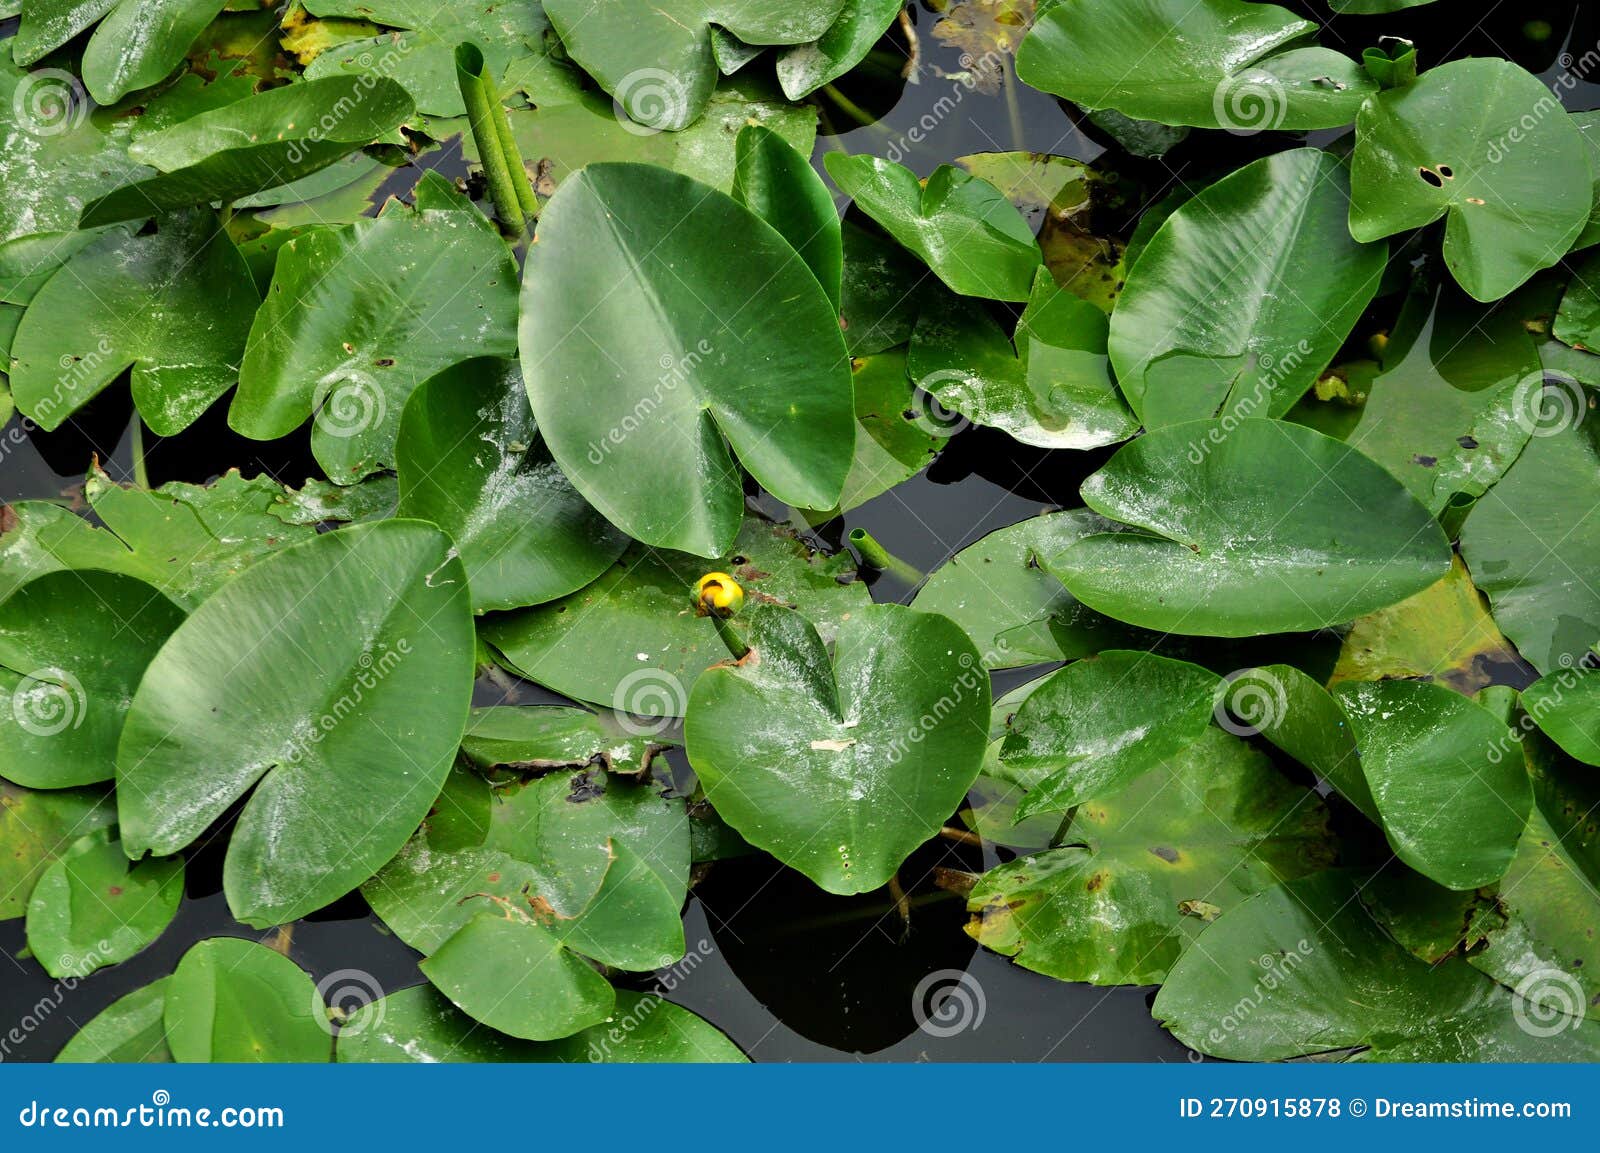 Water lily pond (Nuphar) stock photo. Image of lake - 270915878